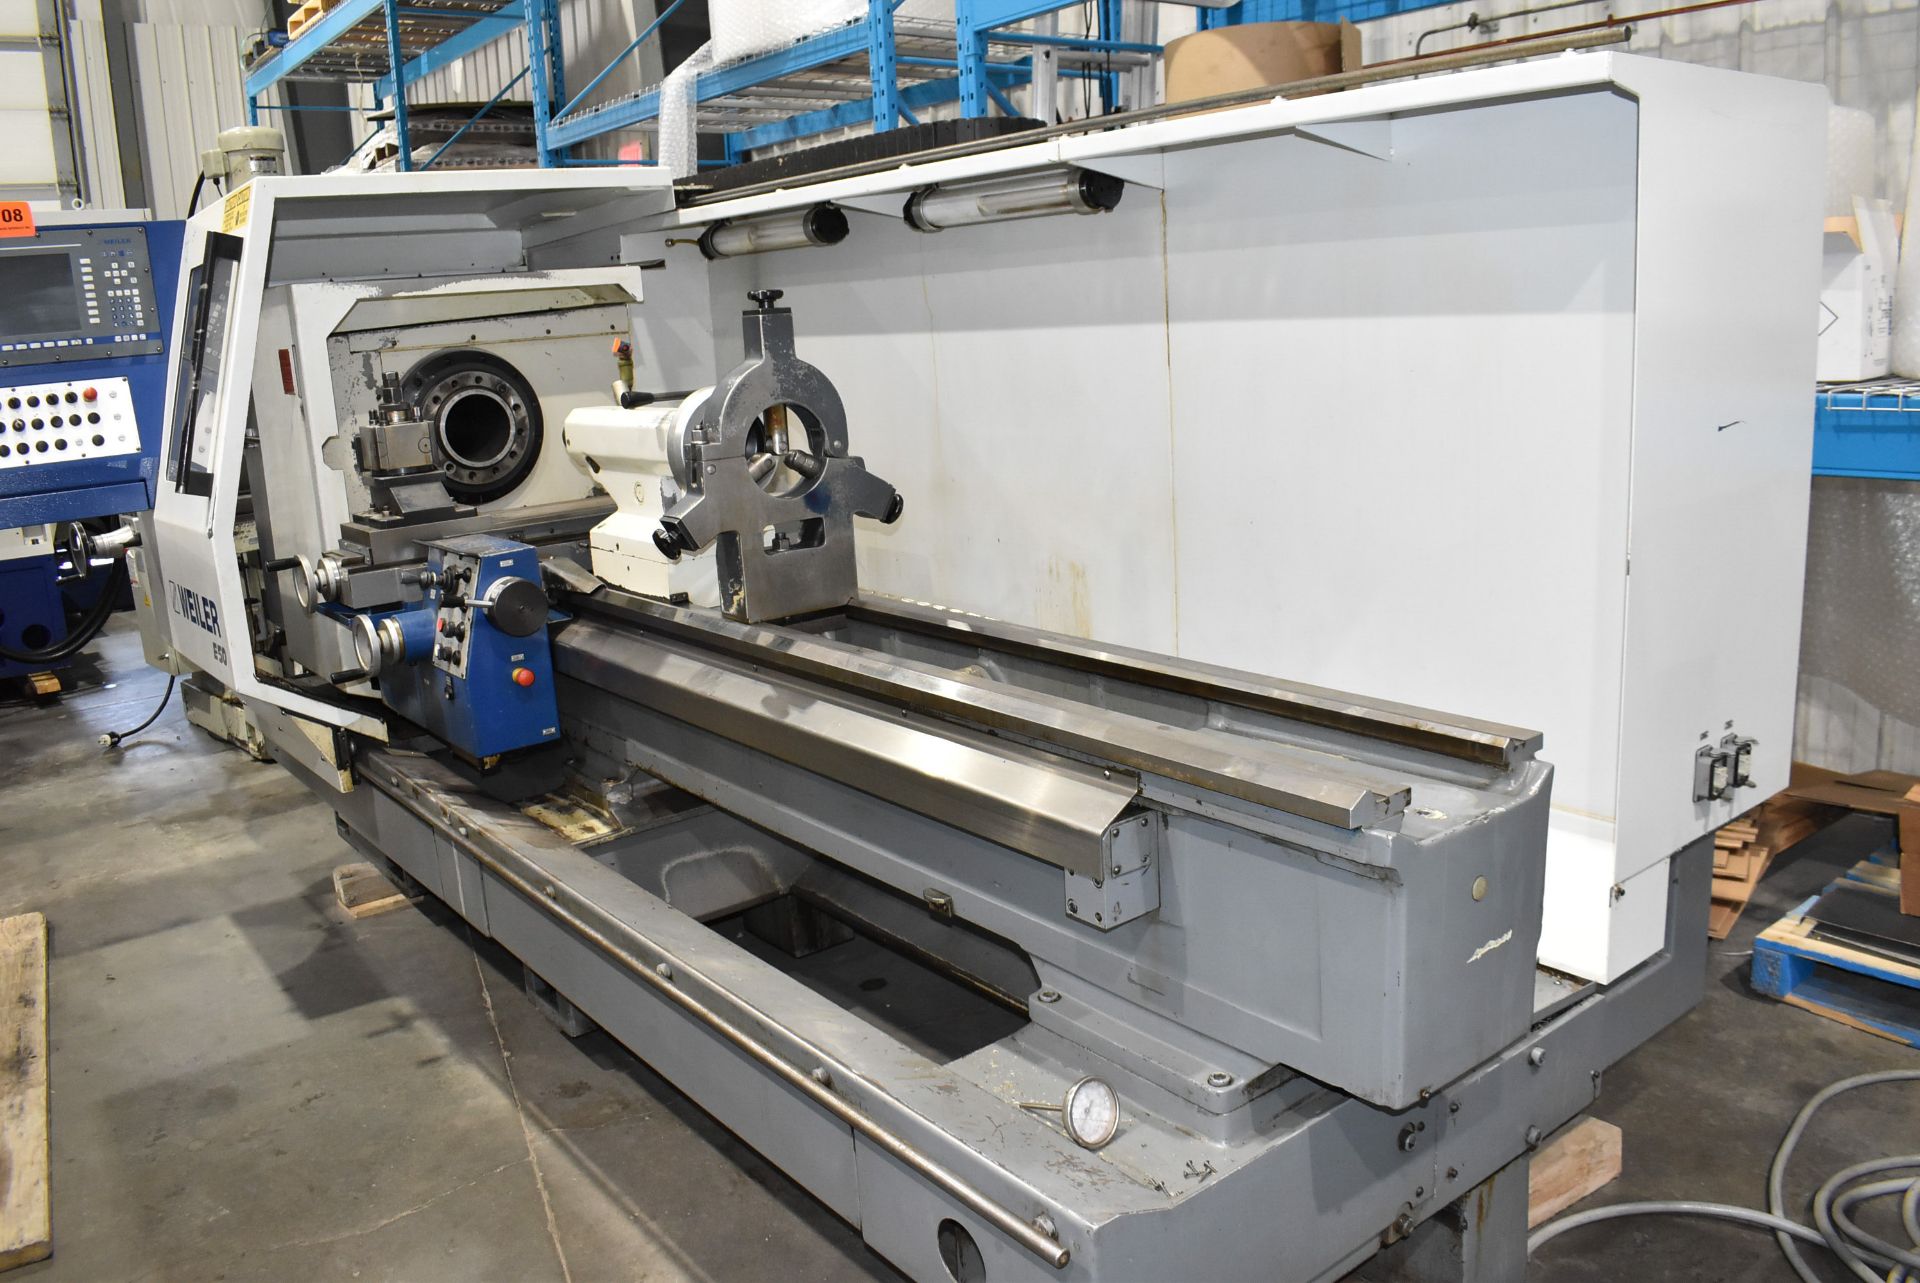 WEILER (2013) E50X2000-165 CNC LATHE WITH WEILER CNC CONTROL, 4-JAW CHUCK, 22.44" SWING OVER BED, - Image 4 of 11